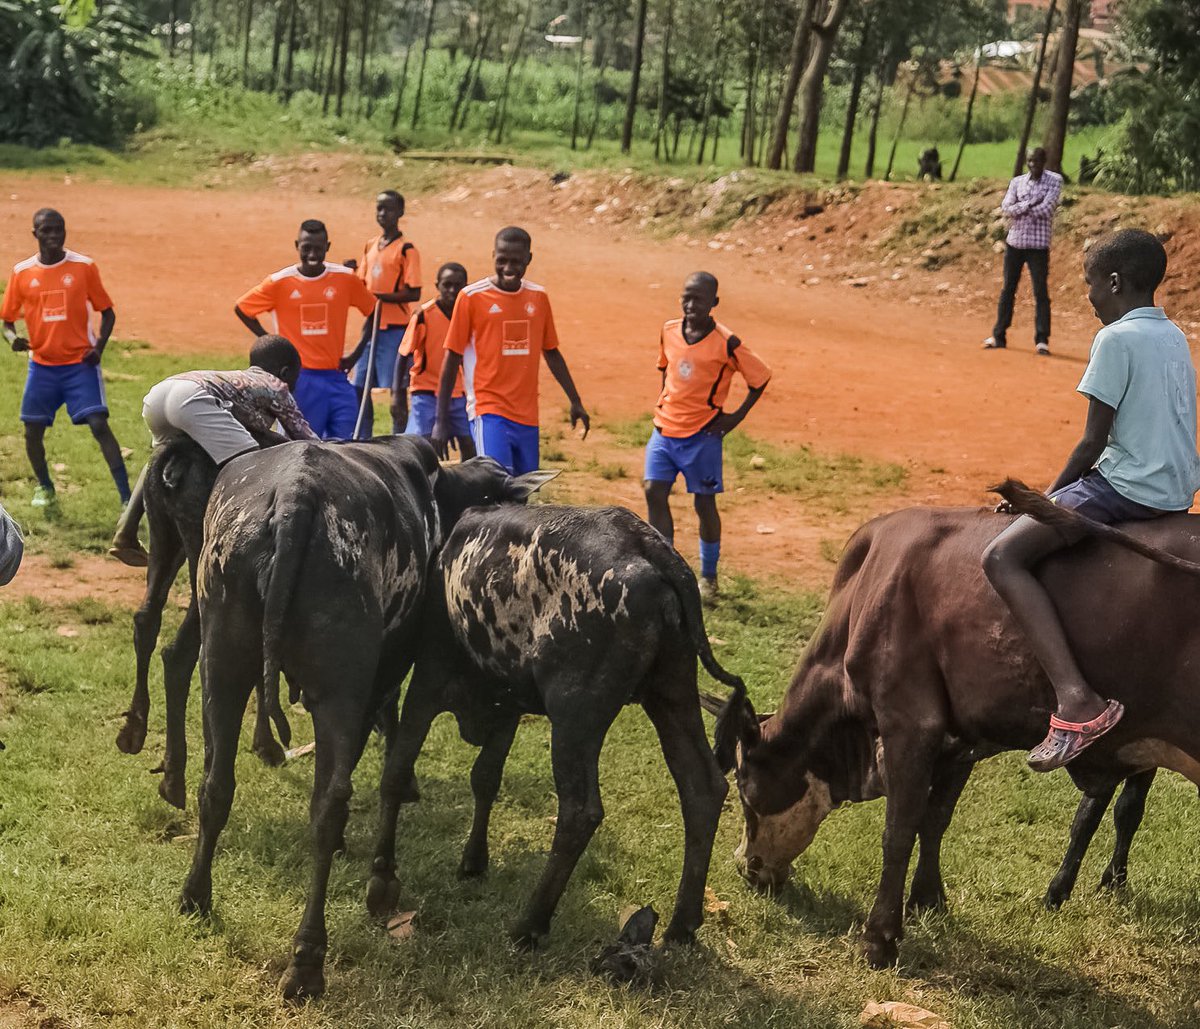 About to start training in Uganda 🇺🇬⚽️ 🐮😃 #playitright #playitvolf at #volfsocceracademy 
#volfsocceracademy #volfsoccer #socceracademy #soccerskills #soccerlife #uganda #ugandasoccer #socceruganda #africa #africansoccer #soccerafrica #soccerpassion #soccerplayer #africannature